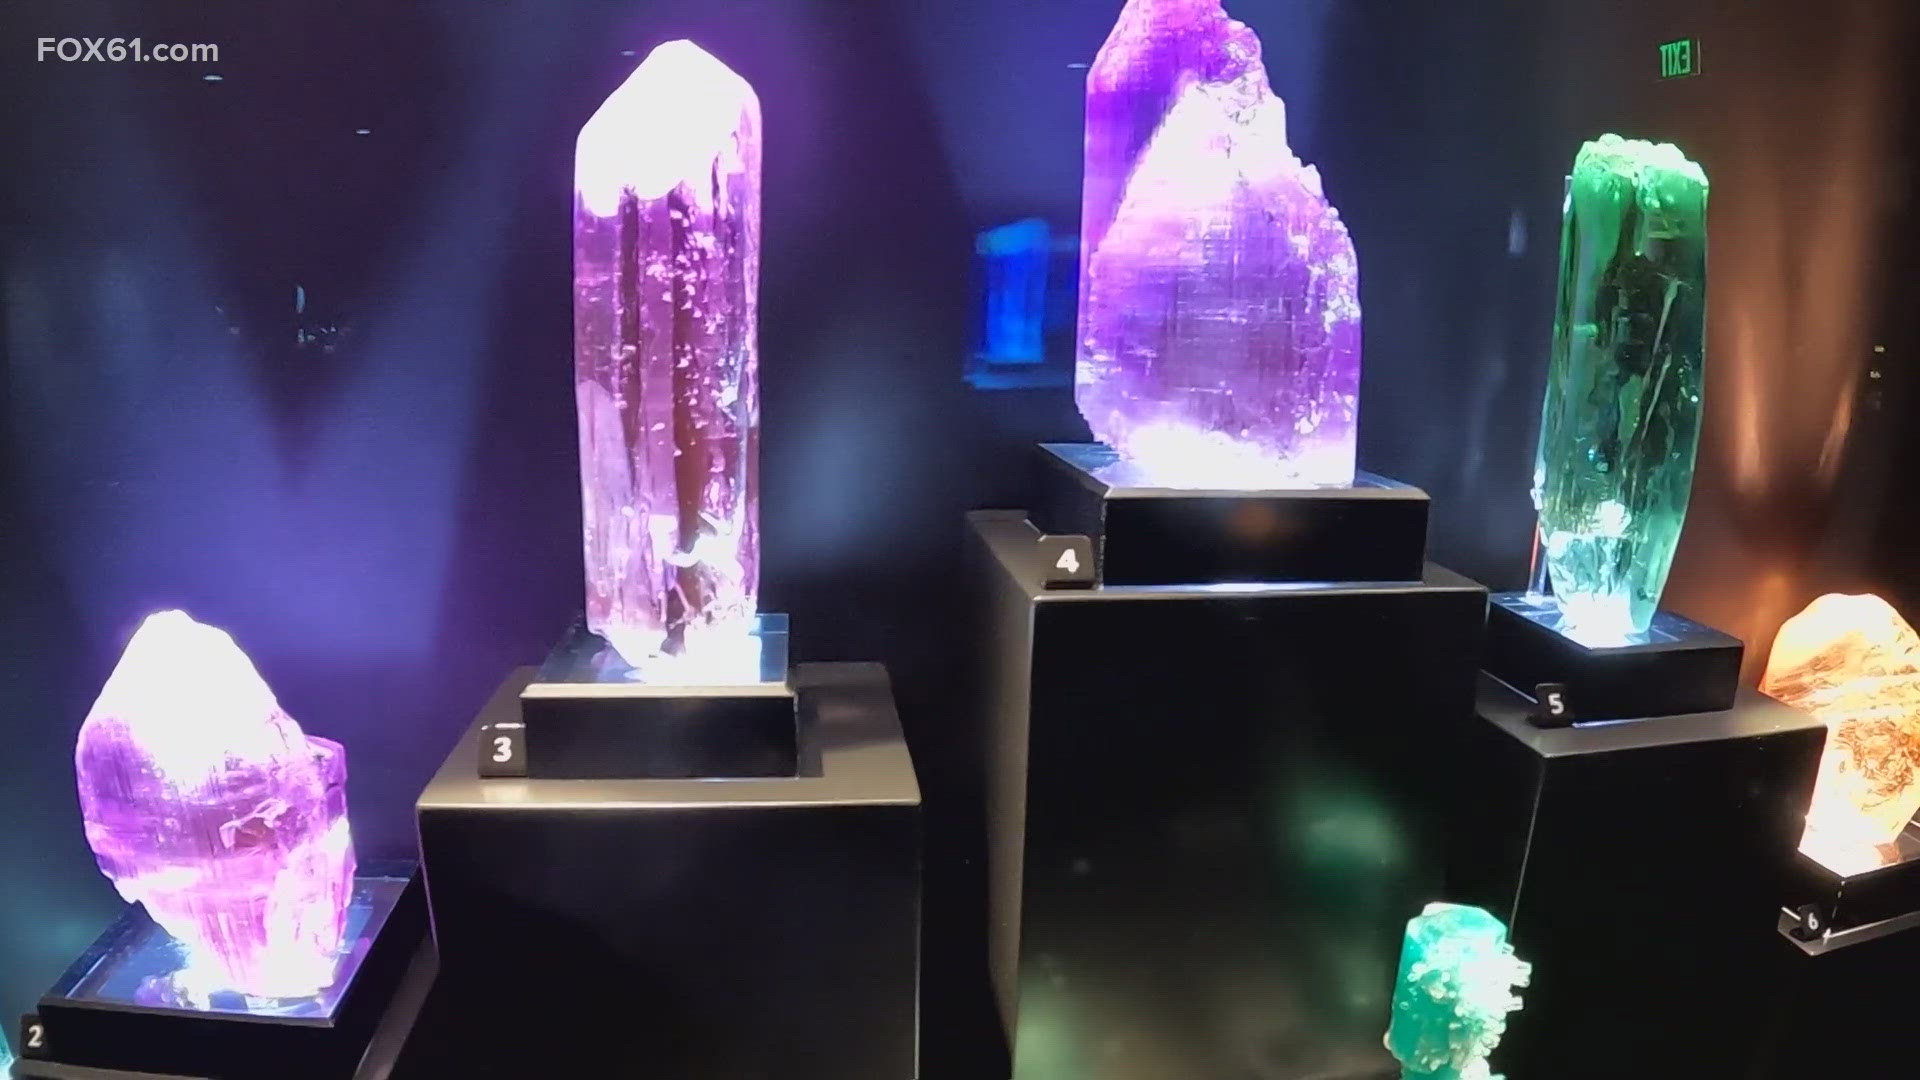 The exhibit showcases a treasured collection of gemstones from across the globe.